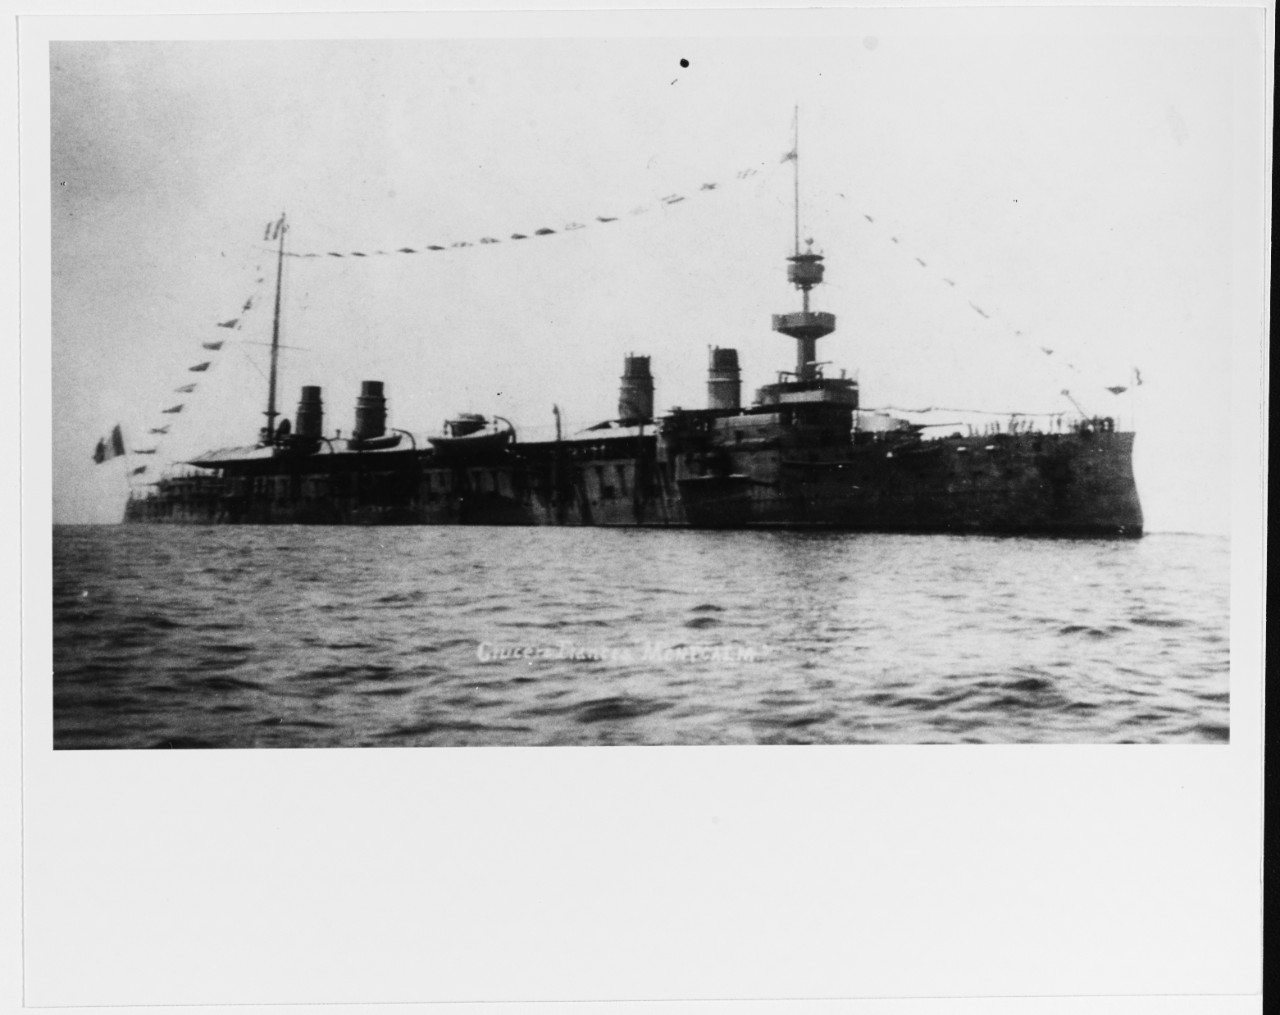 MONTCALM (French Armored Cruiser)